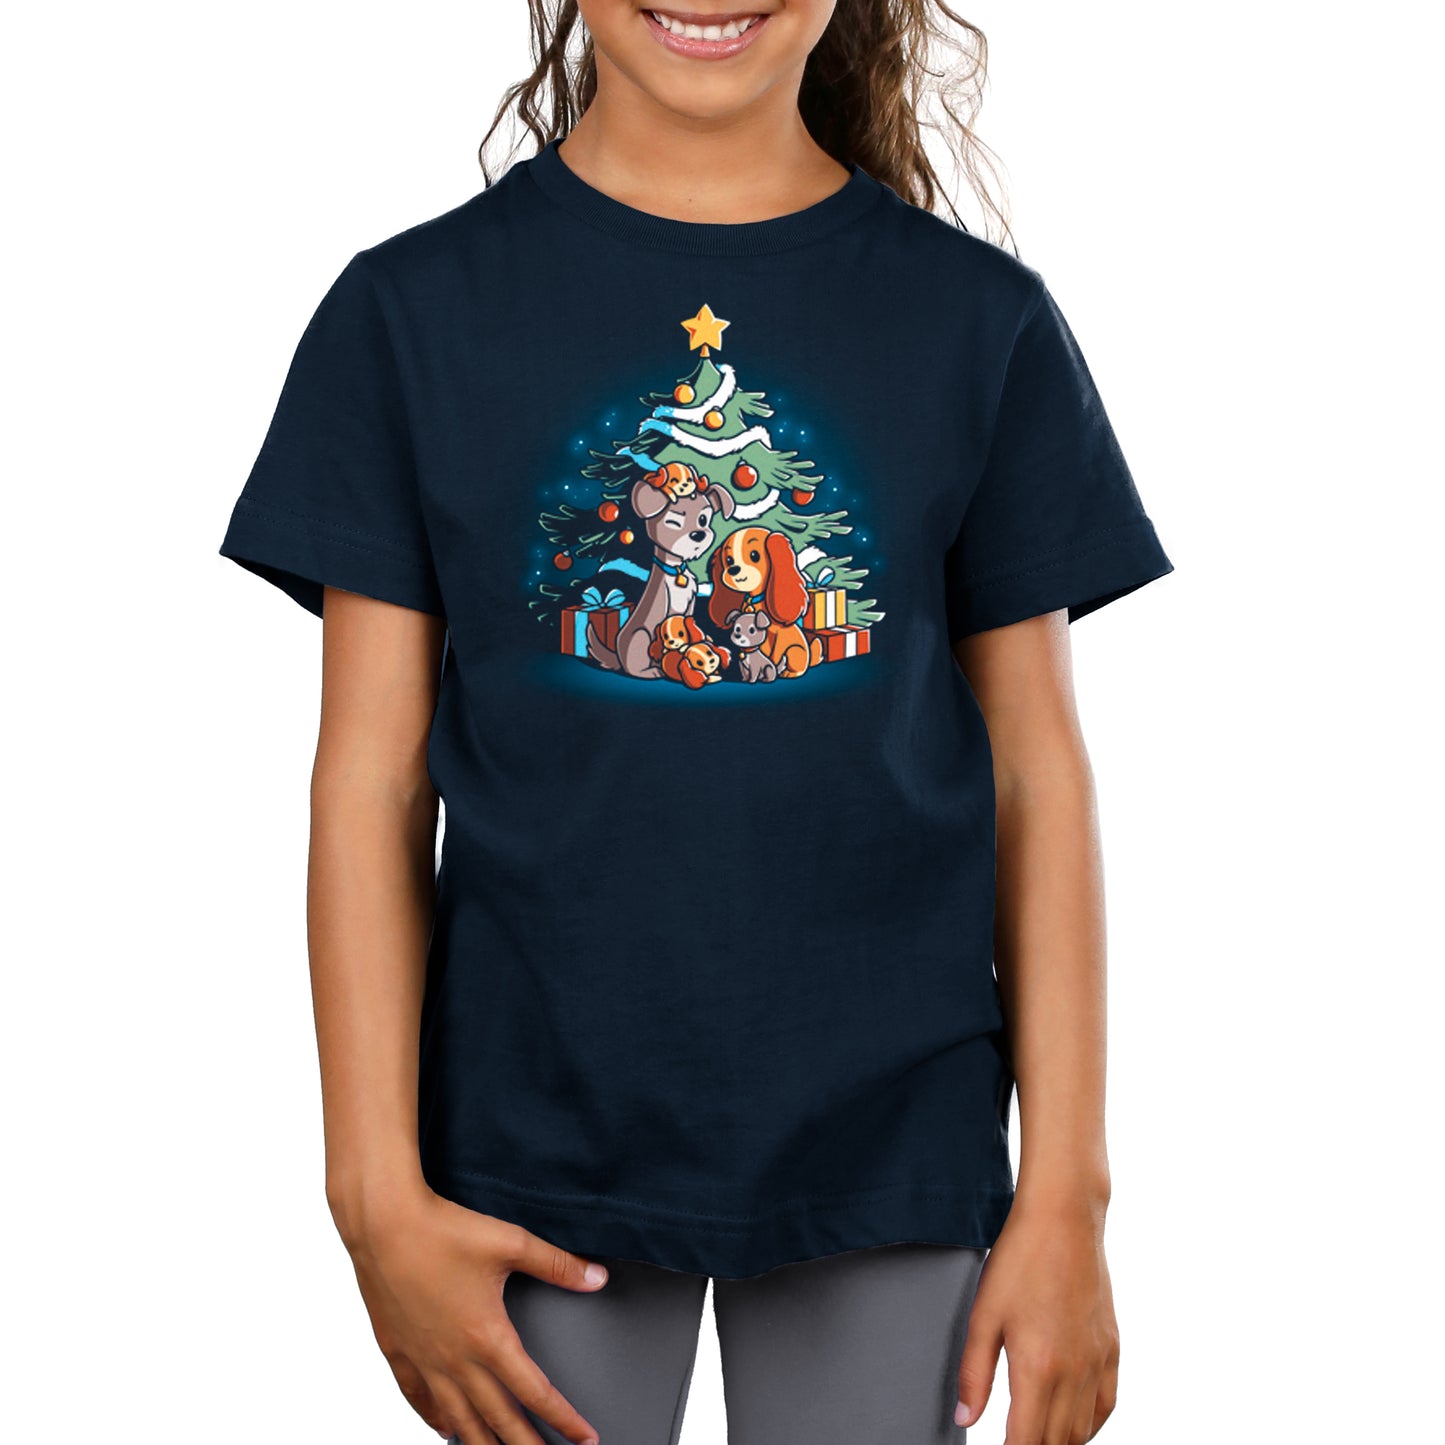 A girl wearing a navy blue t-shirt with a Christmas tree - Merry Christmas From Lady and the Tramp Disney t-shirt.